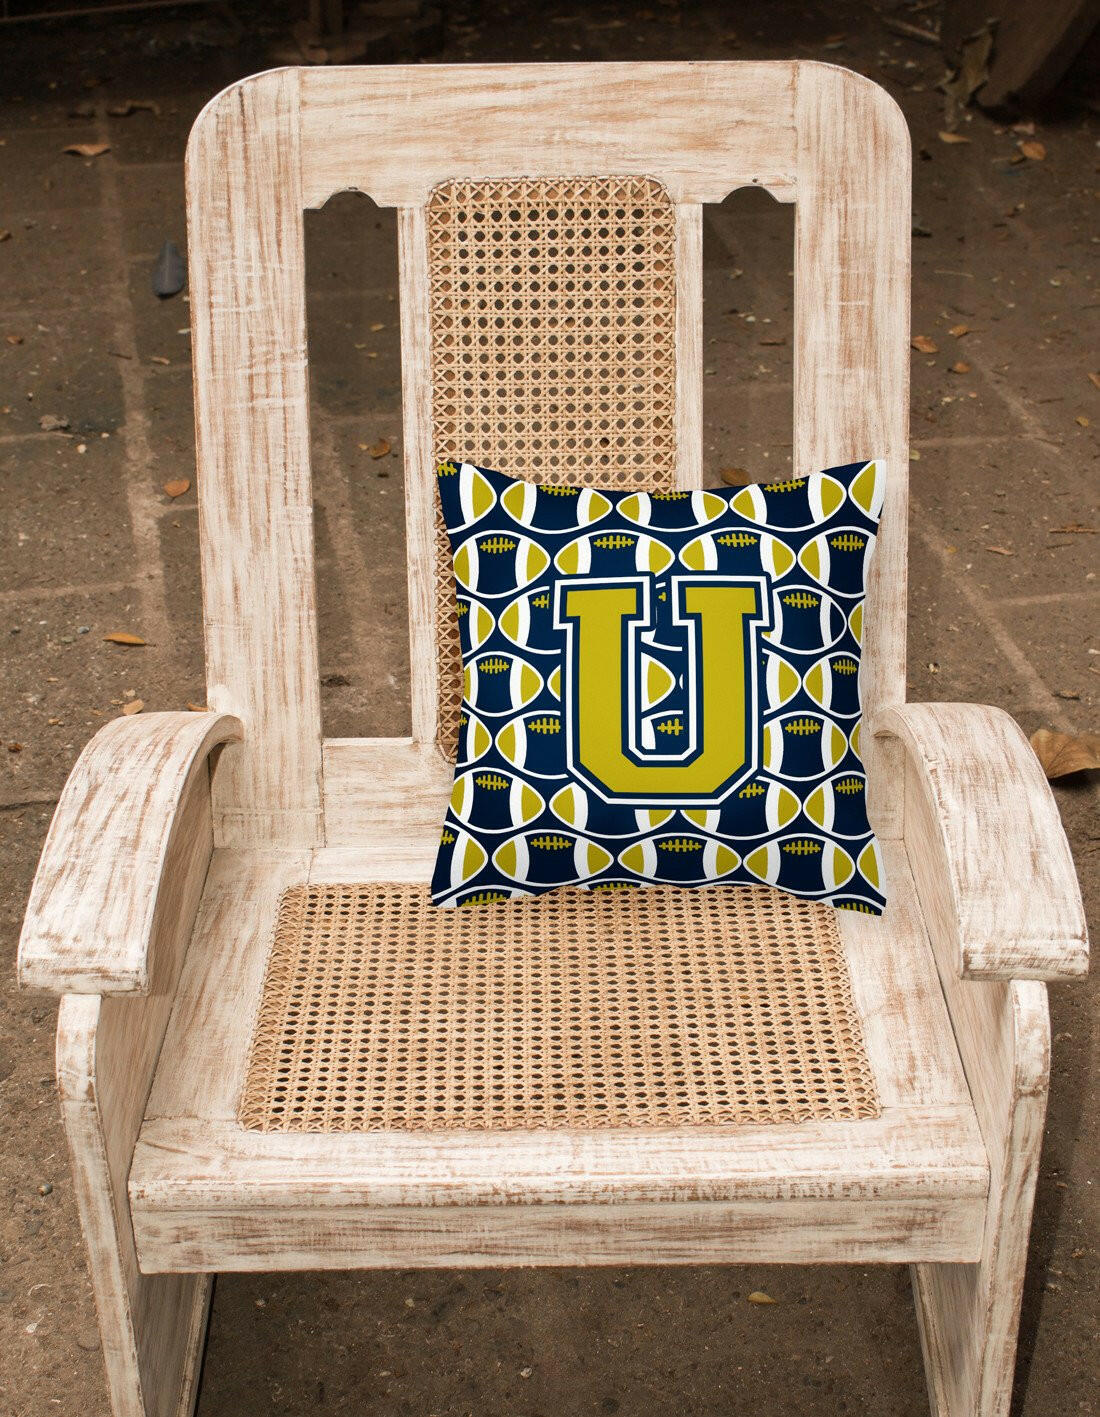 Letter U Football Blue and Gold Fabric Decorative Pillow CJ1074-UPW1414 by Caroline's Treasures